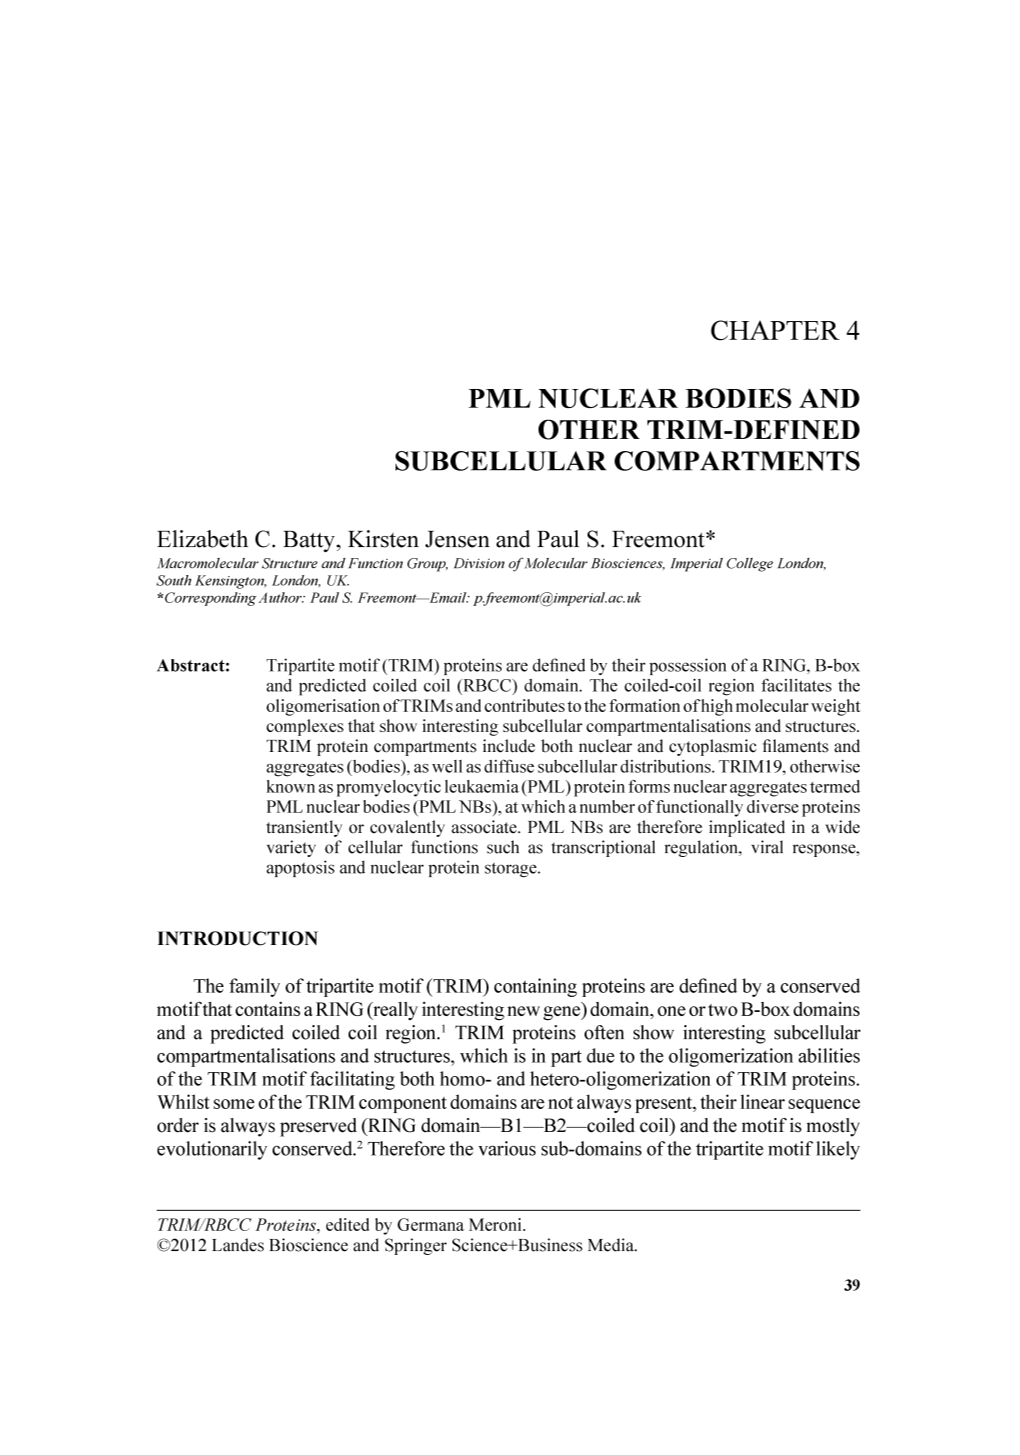 Chapter 4 Pml Nuclear Bodies and Other Trim-Defined